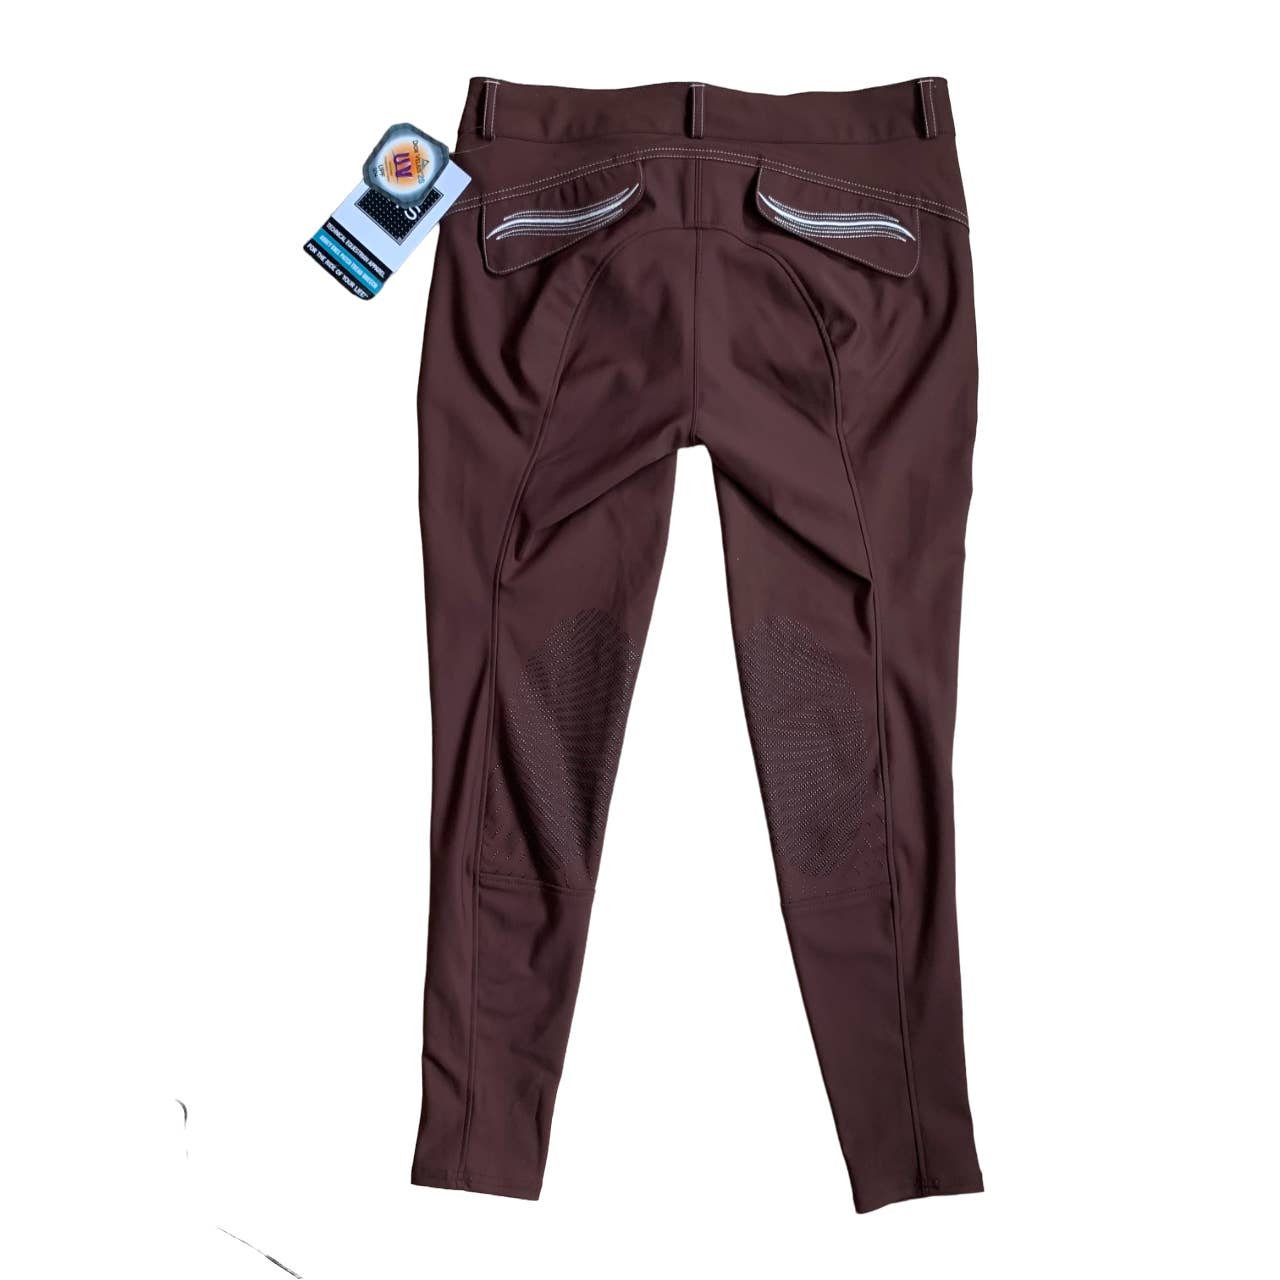 FITS Riding Ltd 'Abbey' Knee Patch Breeches in Mahogany - Woman's Large